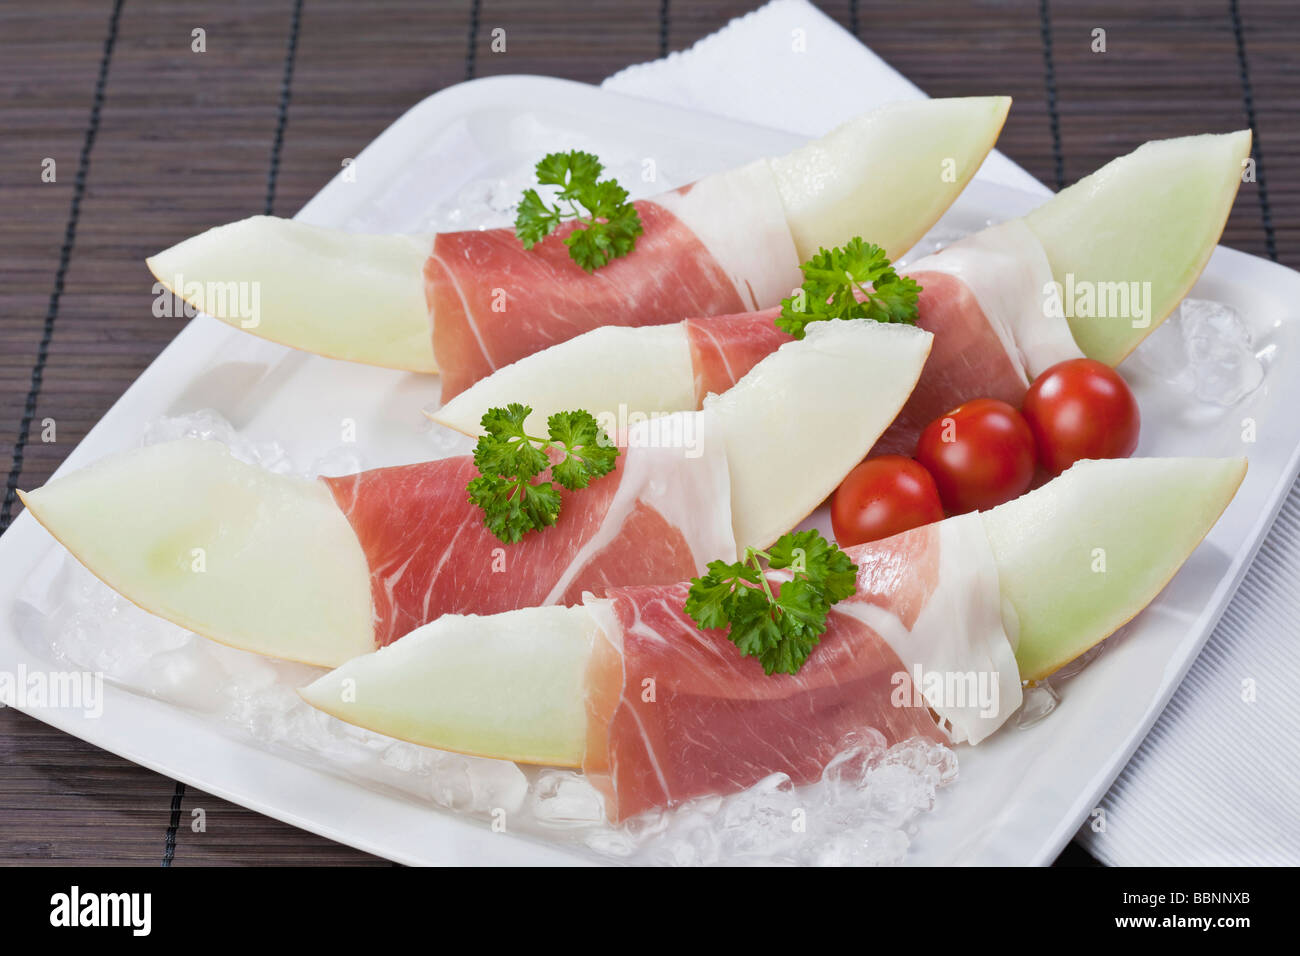 Melon slices with Parma ham on crushed ice Stock Photo: 24449779 ...